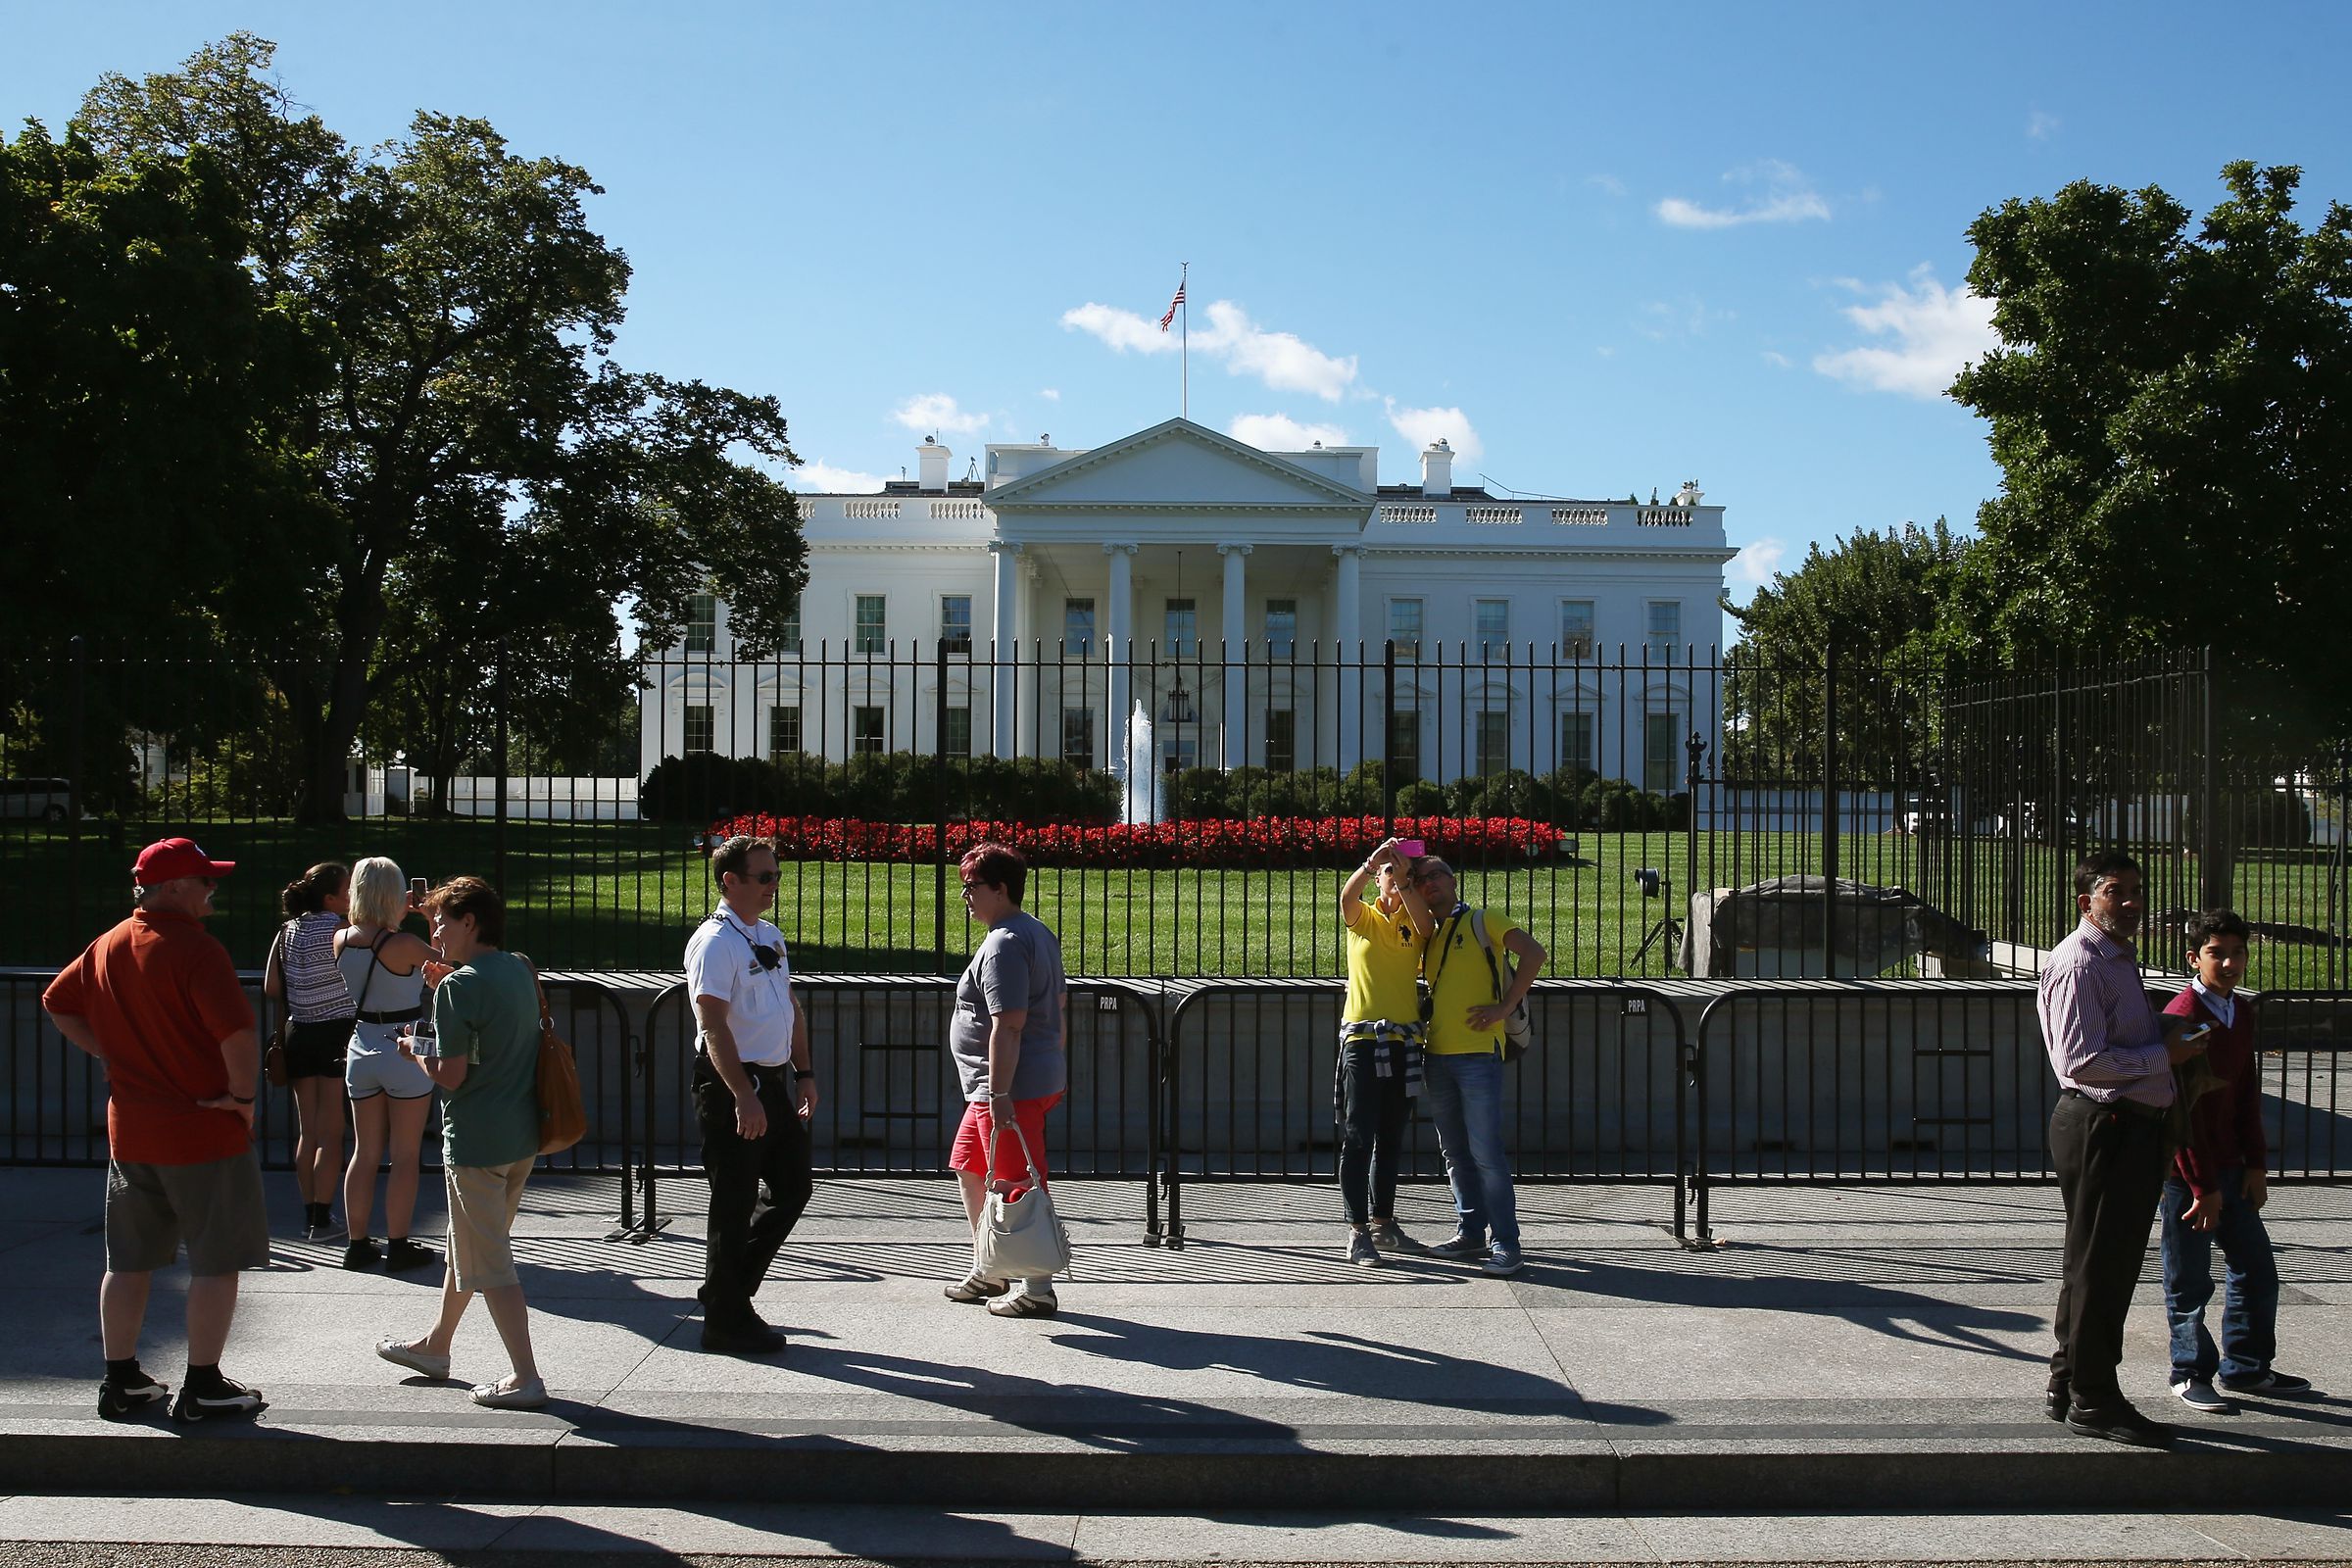 Secret Service Re-Evaluates Security After Breaches At White House